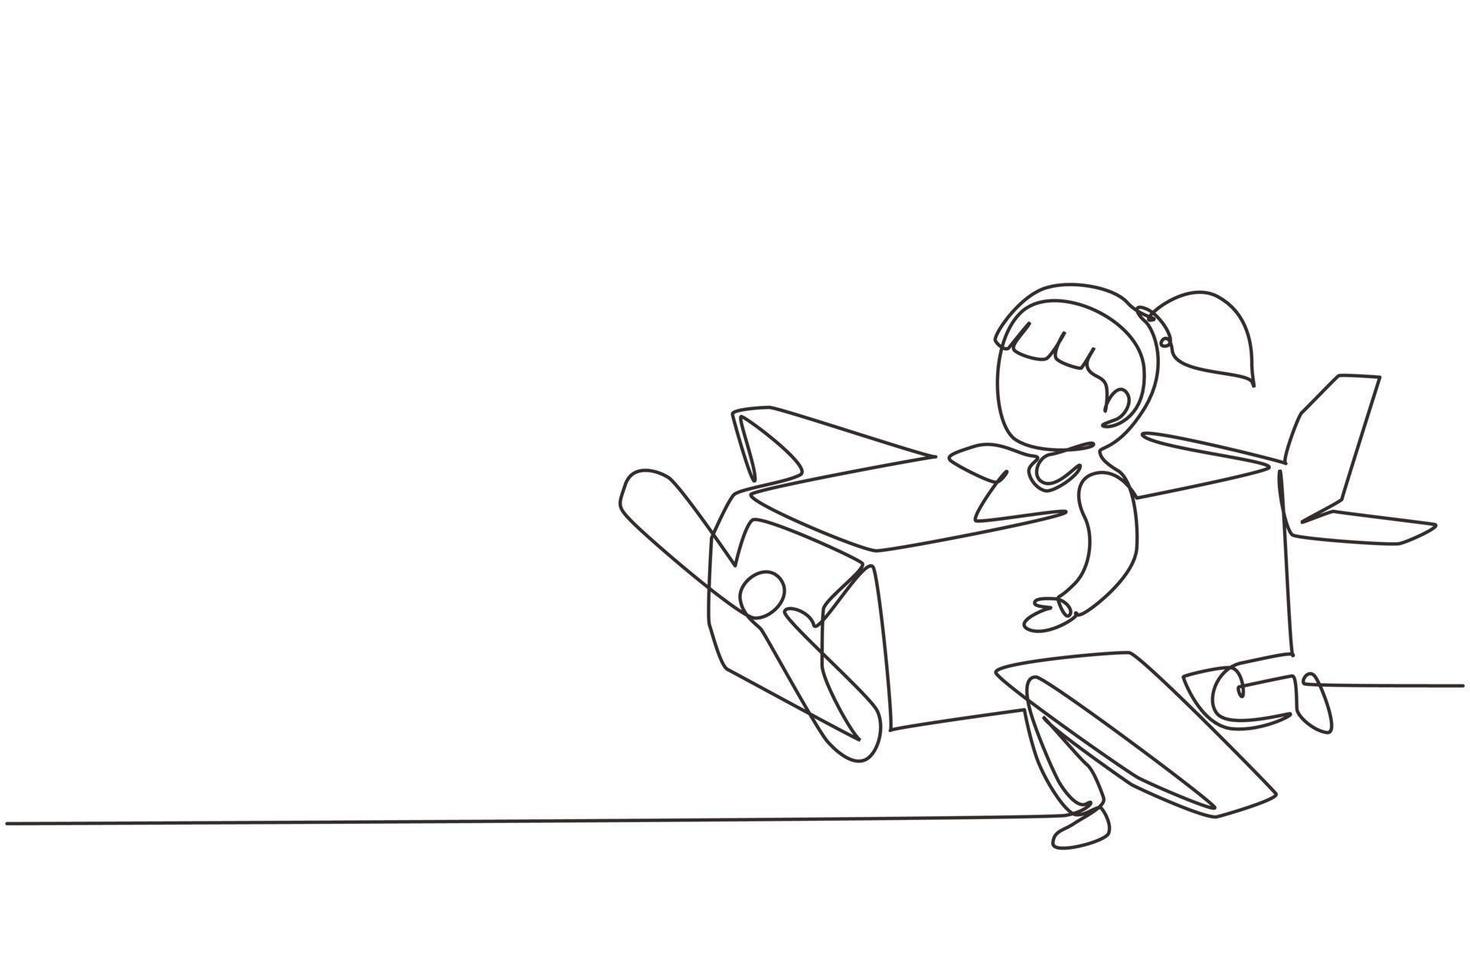 Single continuous line drawing creative girl playing as a pilot with cardboard airplane. Happy kids riding cardboard handmade airplane. Plane game. One line draw graphic design vector illustration